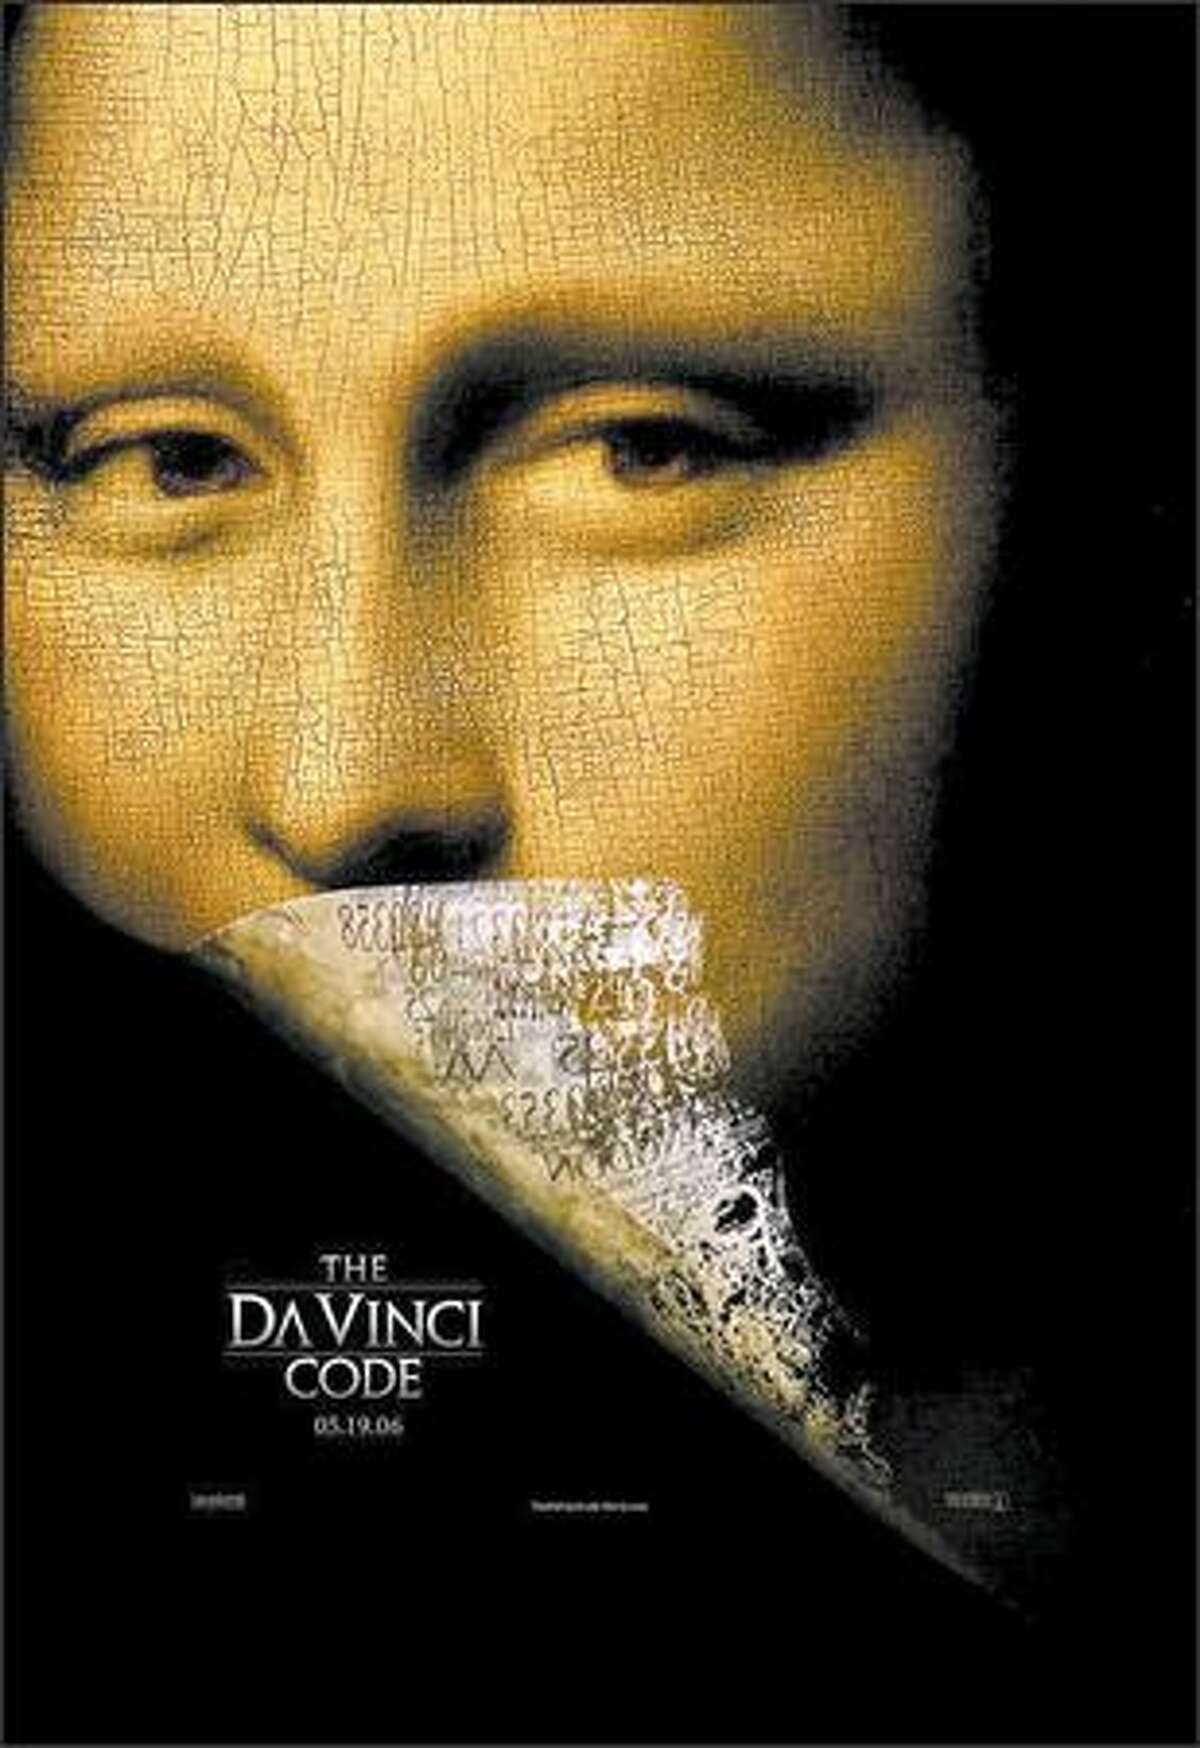 The movie "The Da Vinci Code," based on the book by Dan Brown, will open Friday in theaters.